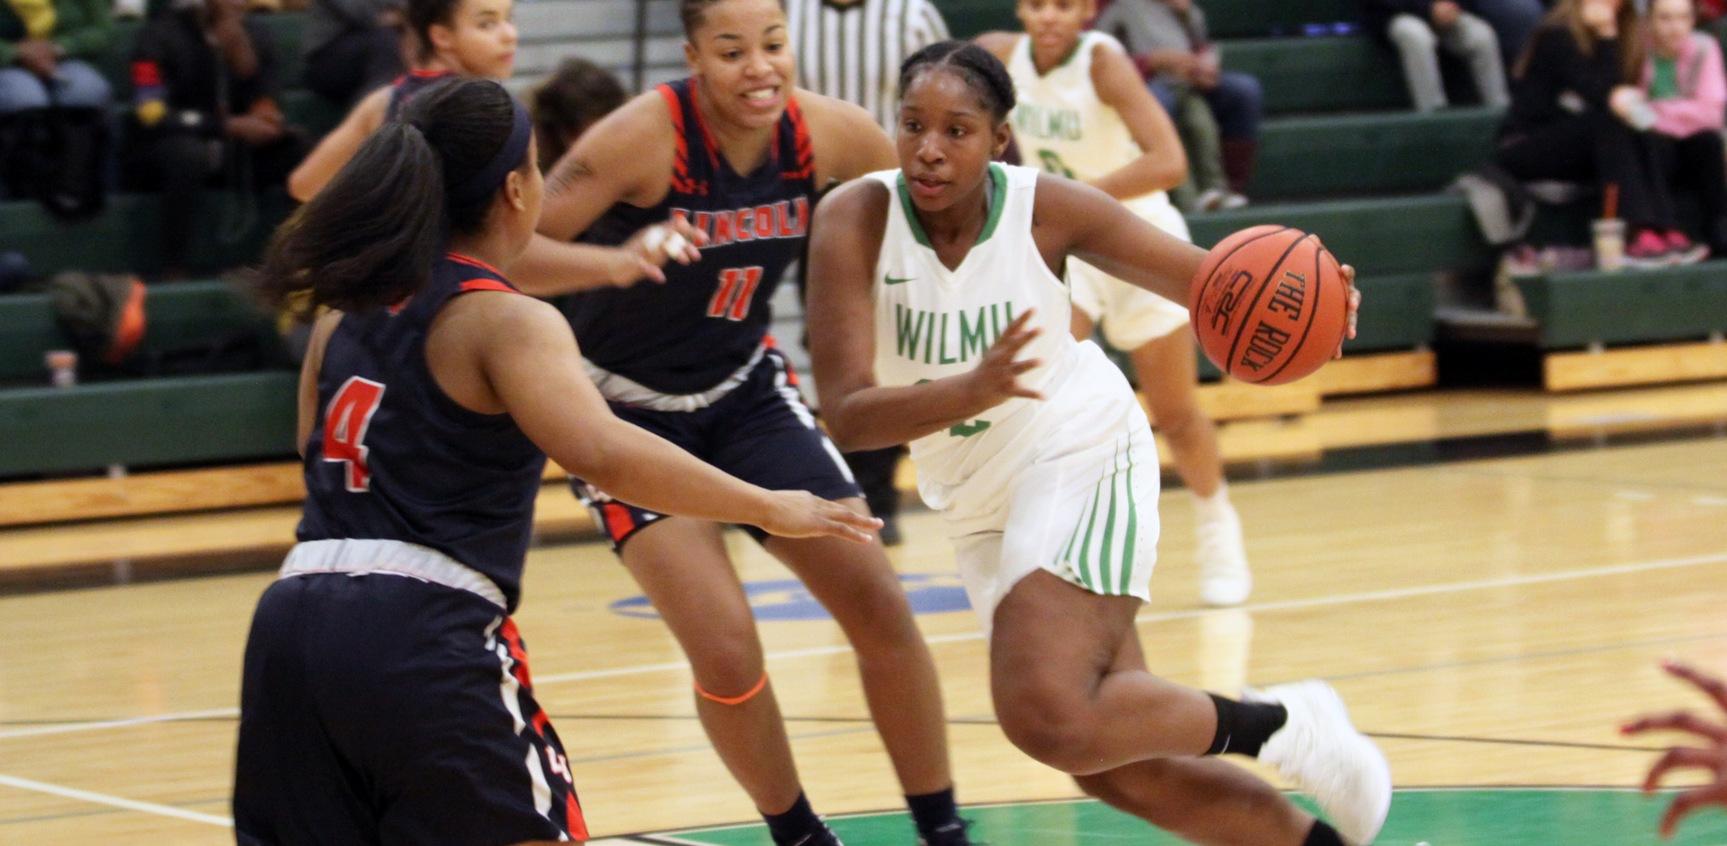 Copyright 2018; Wilmington University. All rights reserved. Senior Nyree Grant drives to the bucket against Lincoln (Pa.). December 31, 2018 vs. Lincoln (Pa.). Photo by Dan Lauletta